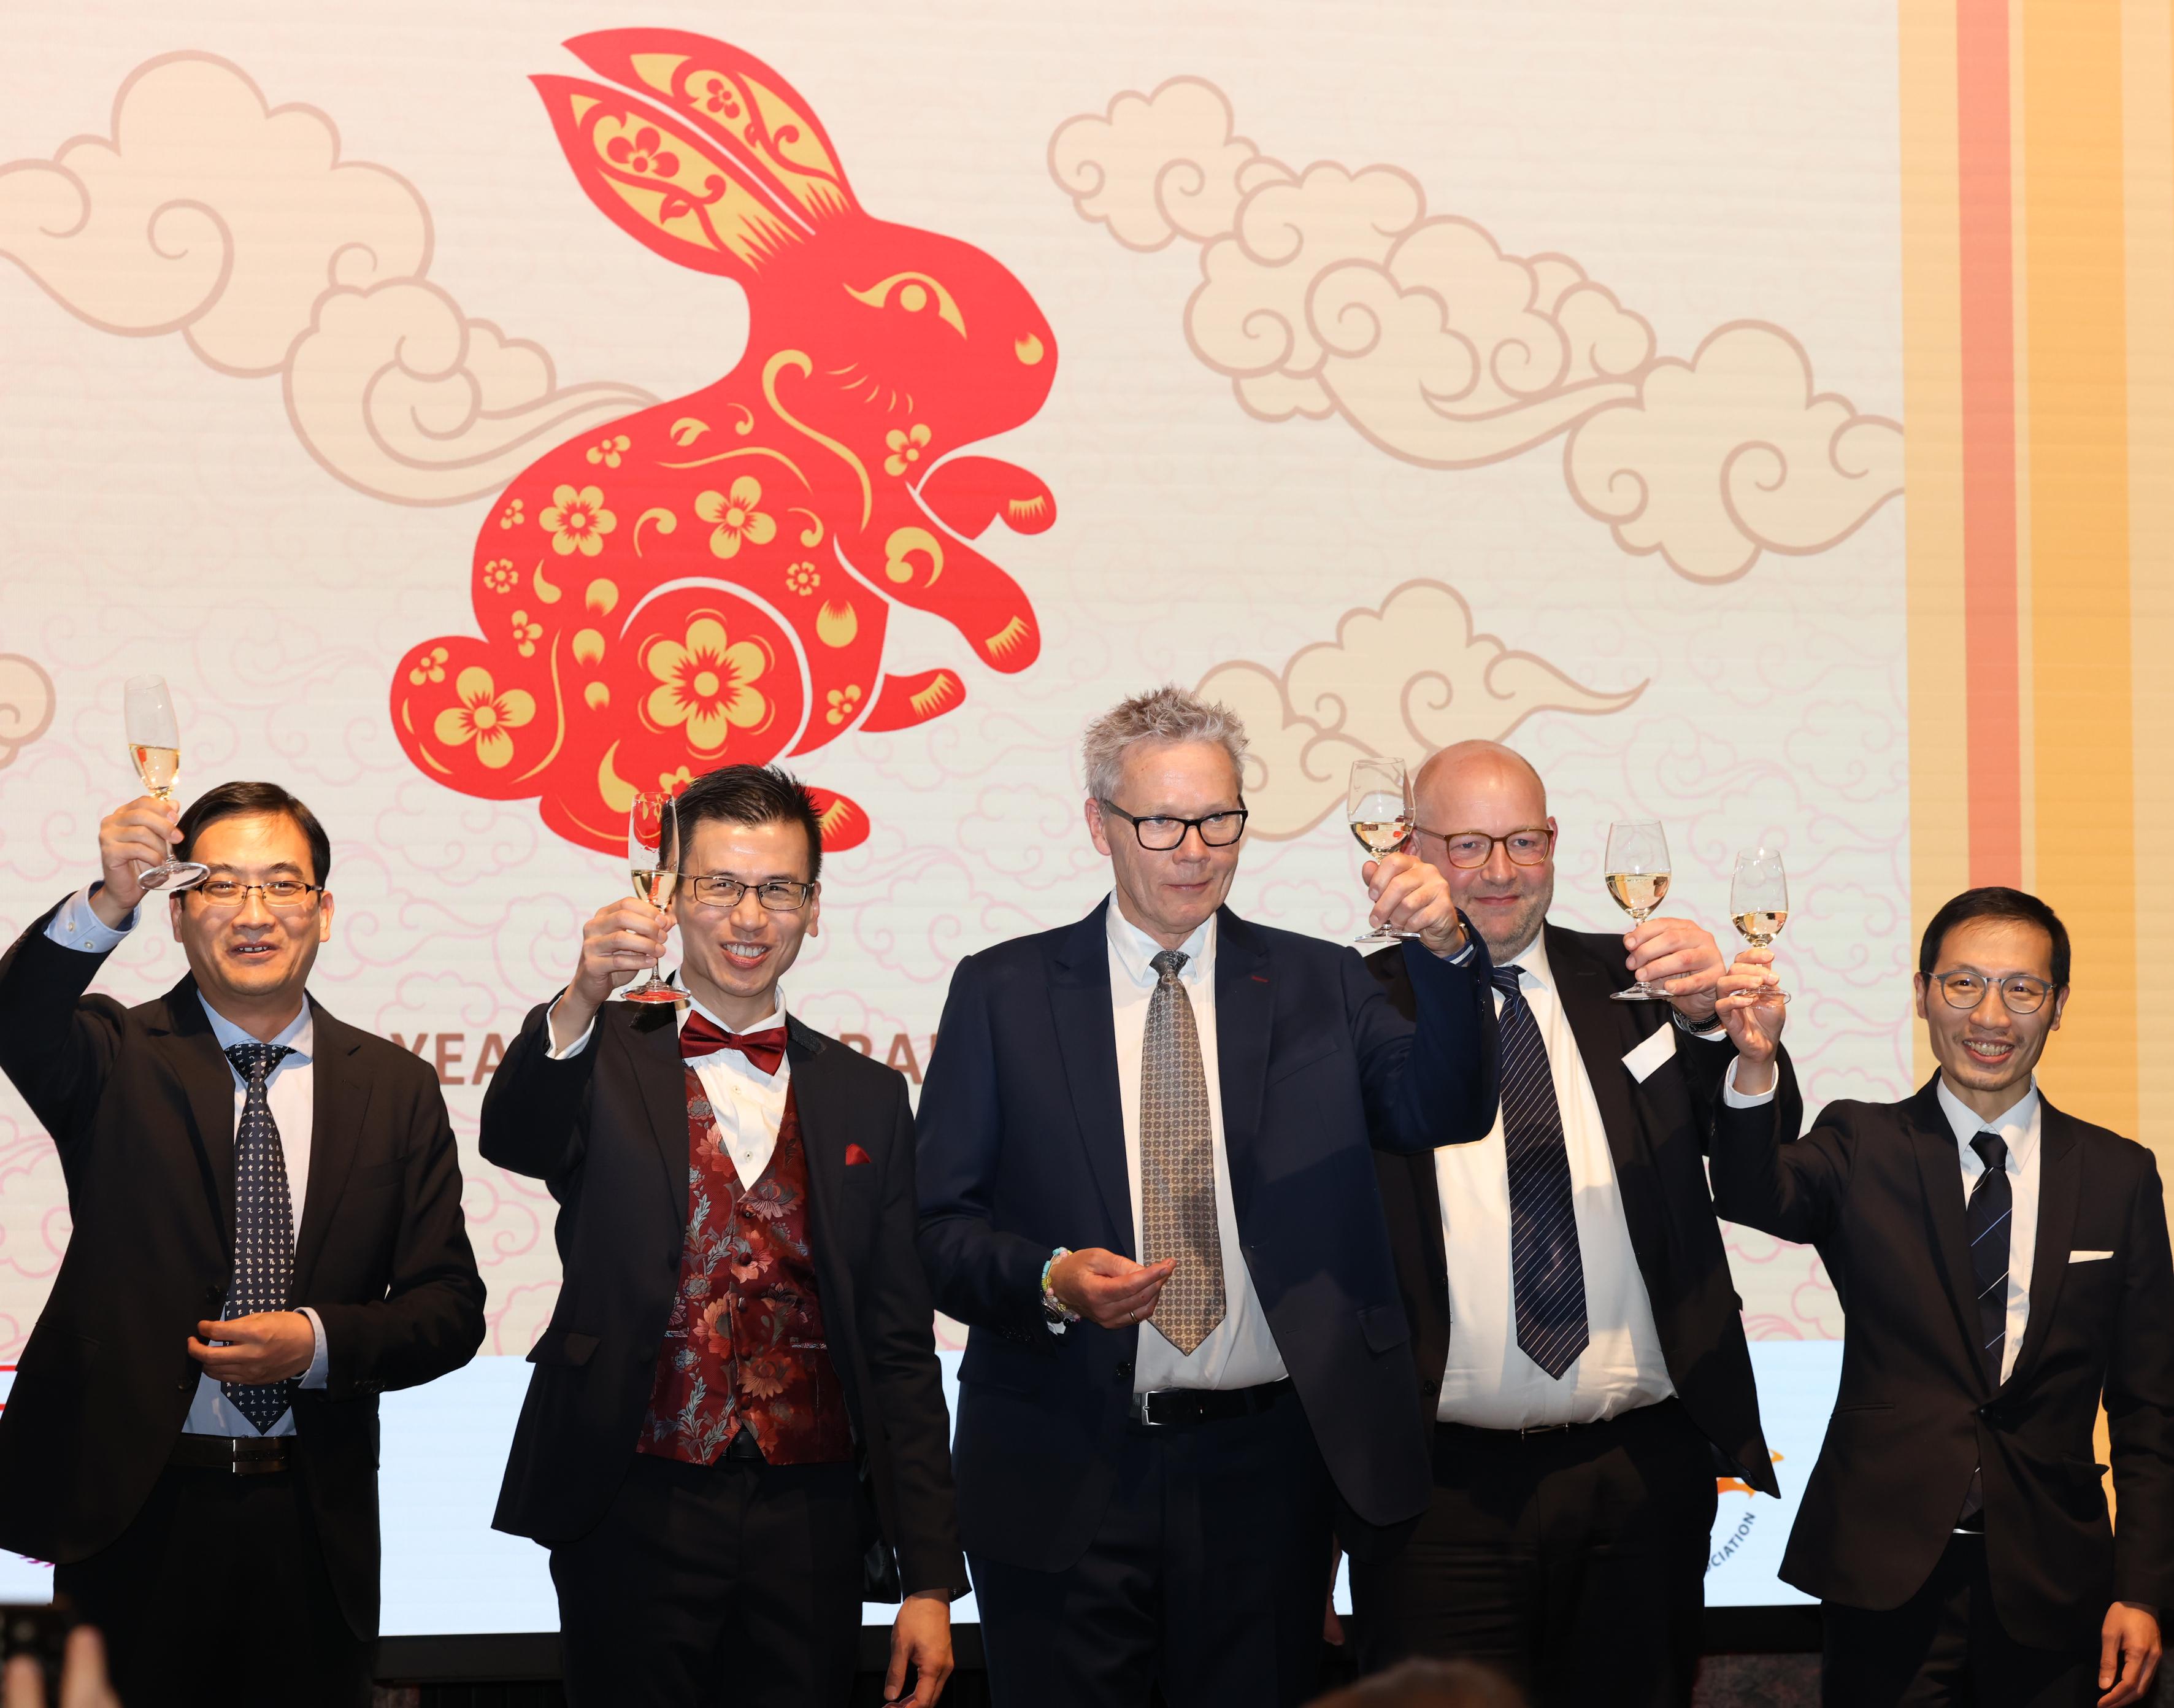 The Hong Kong Economic and Trade Office, London (London ETO) co-hosted receptions in Copenhagen, Denmark, and Stockholm, Sweden, with local business associations on February 7 and 8 respectively for celebrating the Year of the Rabbit. Photo shows (from left) the Minister-Counsellor of the Embassy of the People's Republic of China in the Kingdom of Denmark, Mr Qin Jie; the Director-General of the London ETO, Mr Gilford Law; the Secretary General of the Denmark-Hong Kong Trade Association, Mr Jesper Faber Stuhr; the Chairman of the Denmark-Hong Kong Trade Association, Mr Nikolaj Juhl Hansen; and the Regional Director for Europe, Central Asia & Israel of the Hong Kong Trade Development Council, Mr Silas Chu, toasting at the Copenhagen reception.